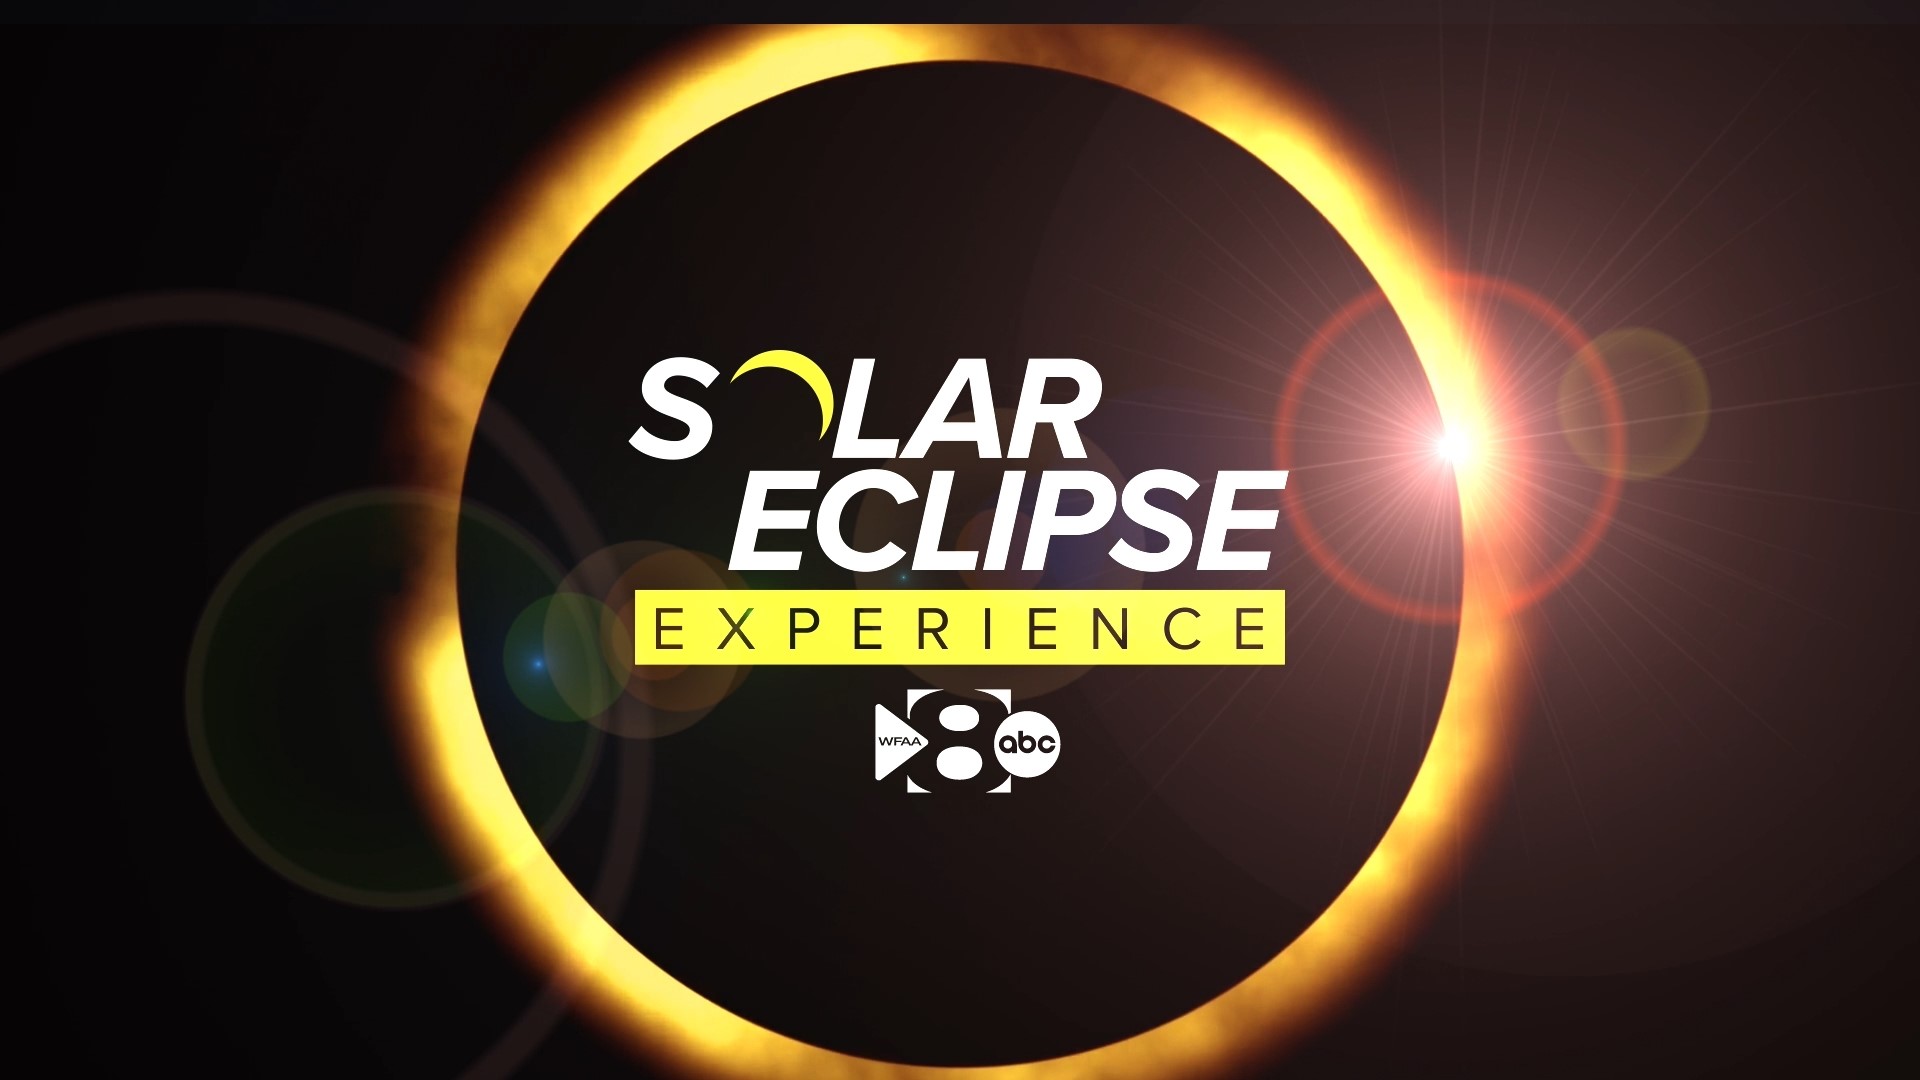 A total solar eclipse is taking place on April 8, 2024, and will be visible in many parts of the United States. Here is WFAA's full broadcast of the event.